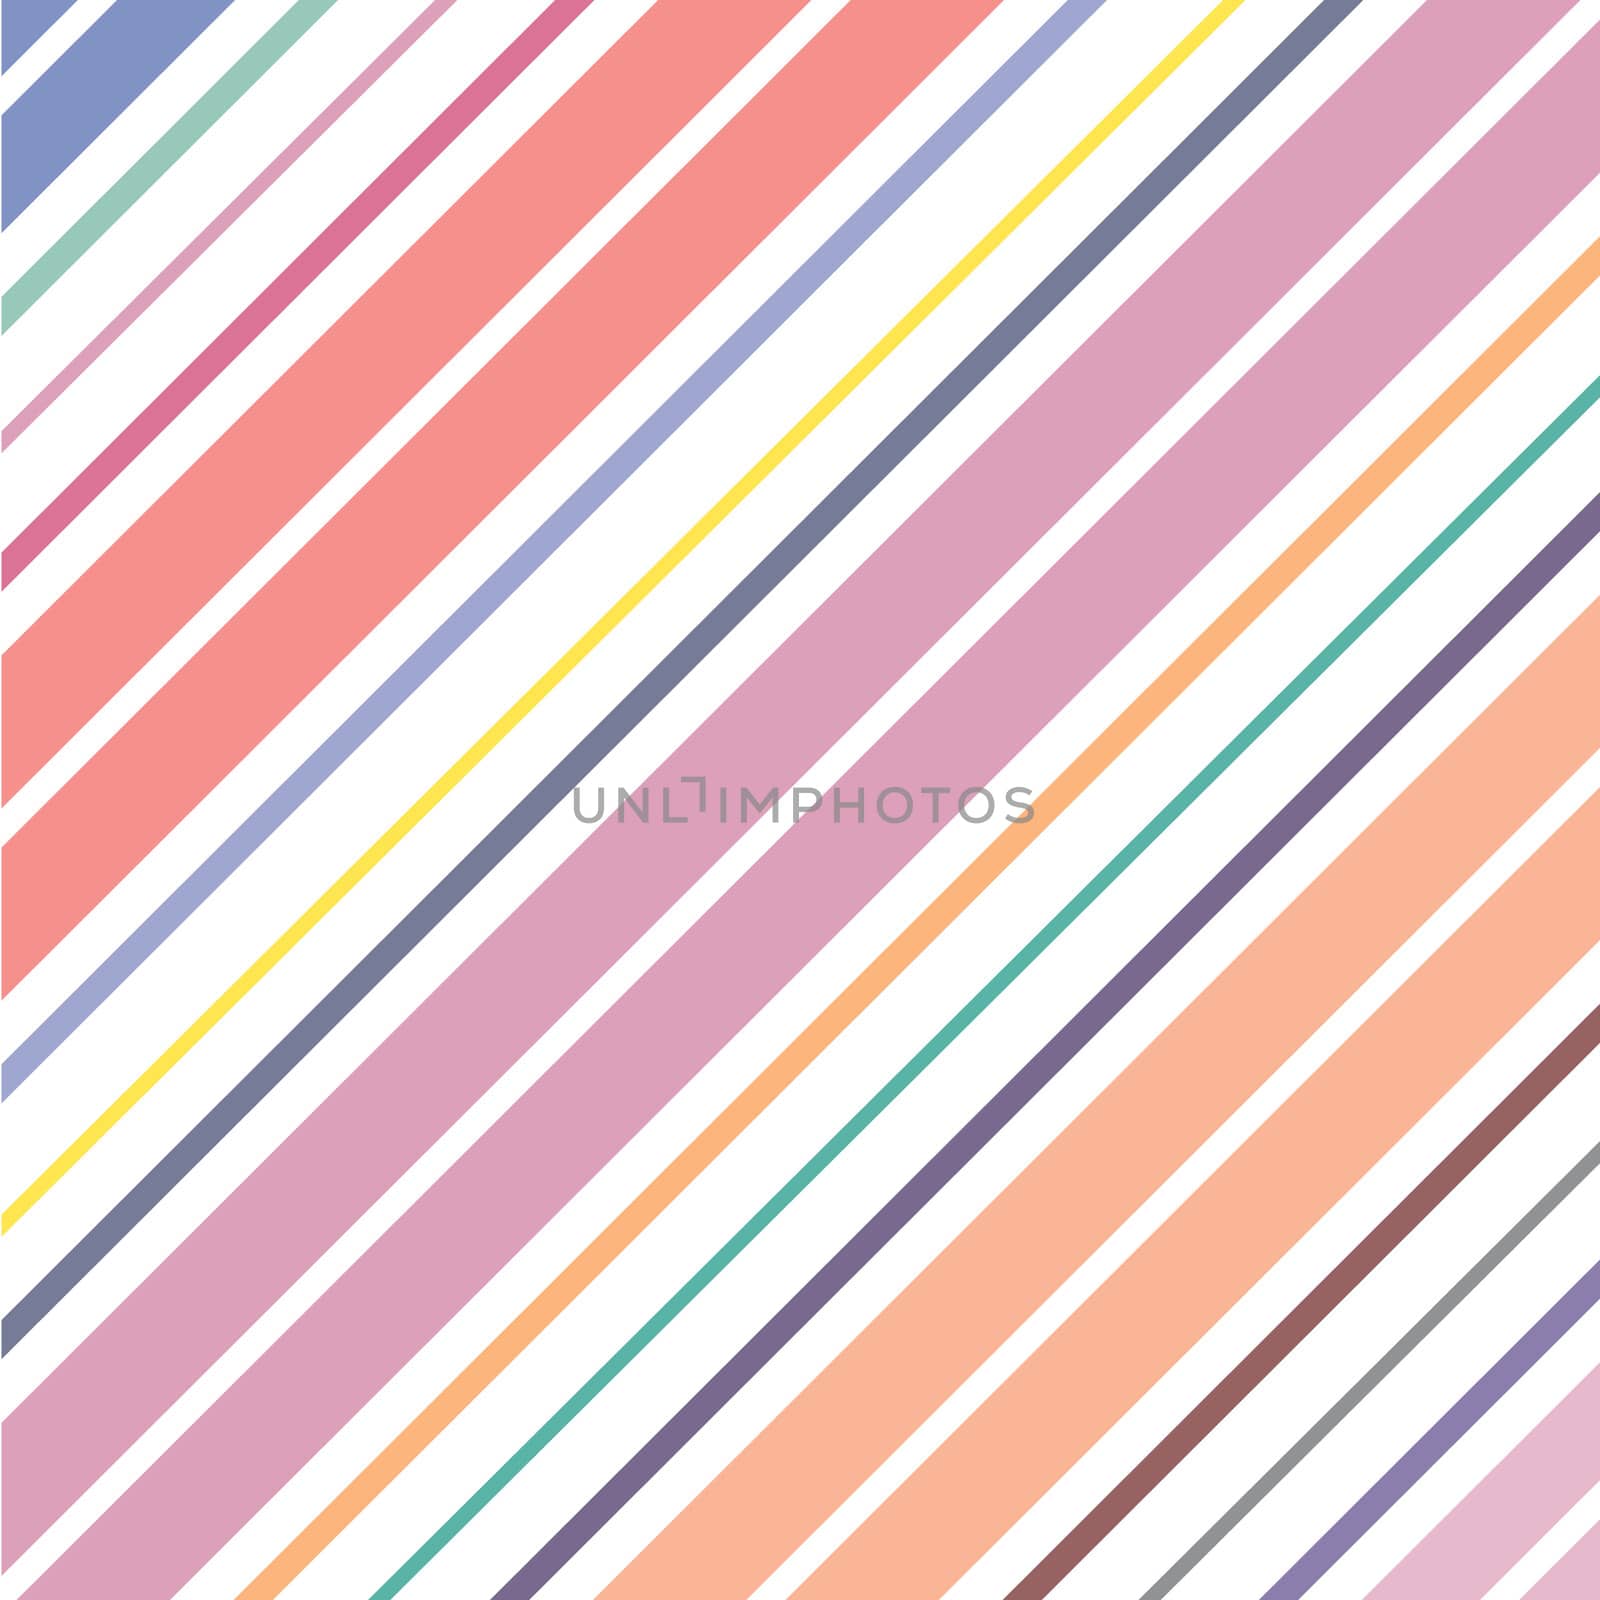 Diagonal Colorful Lines Background by ArtTist